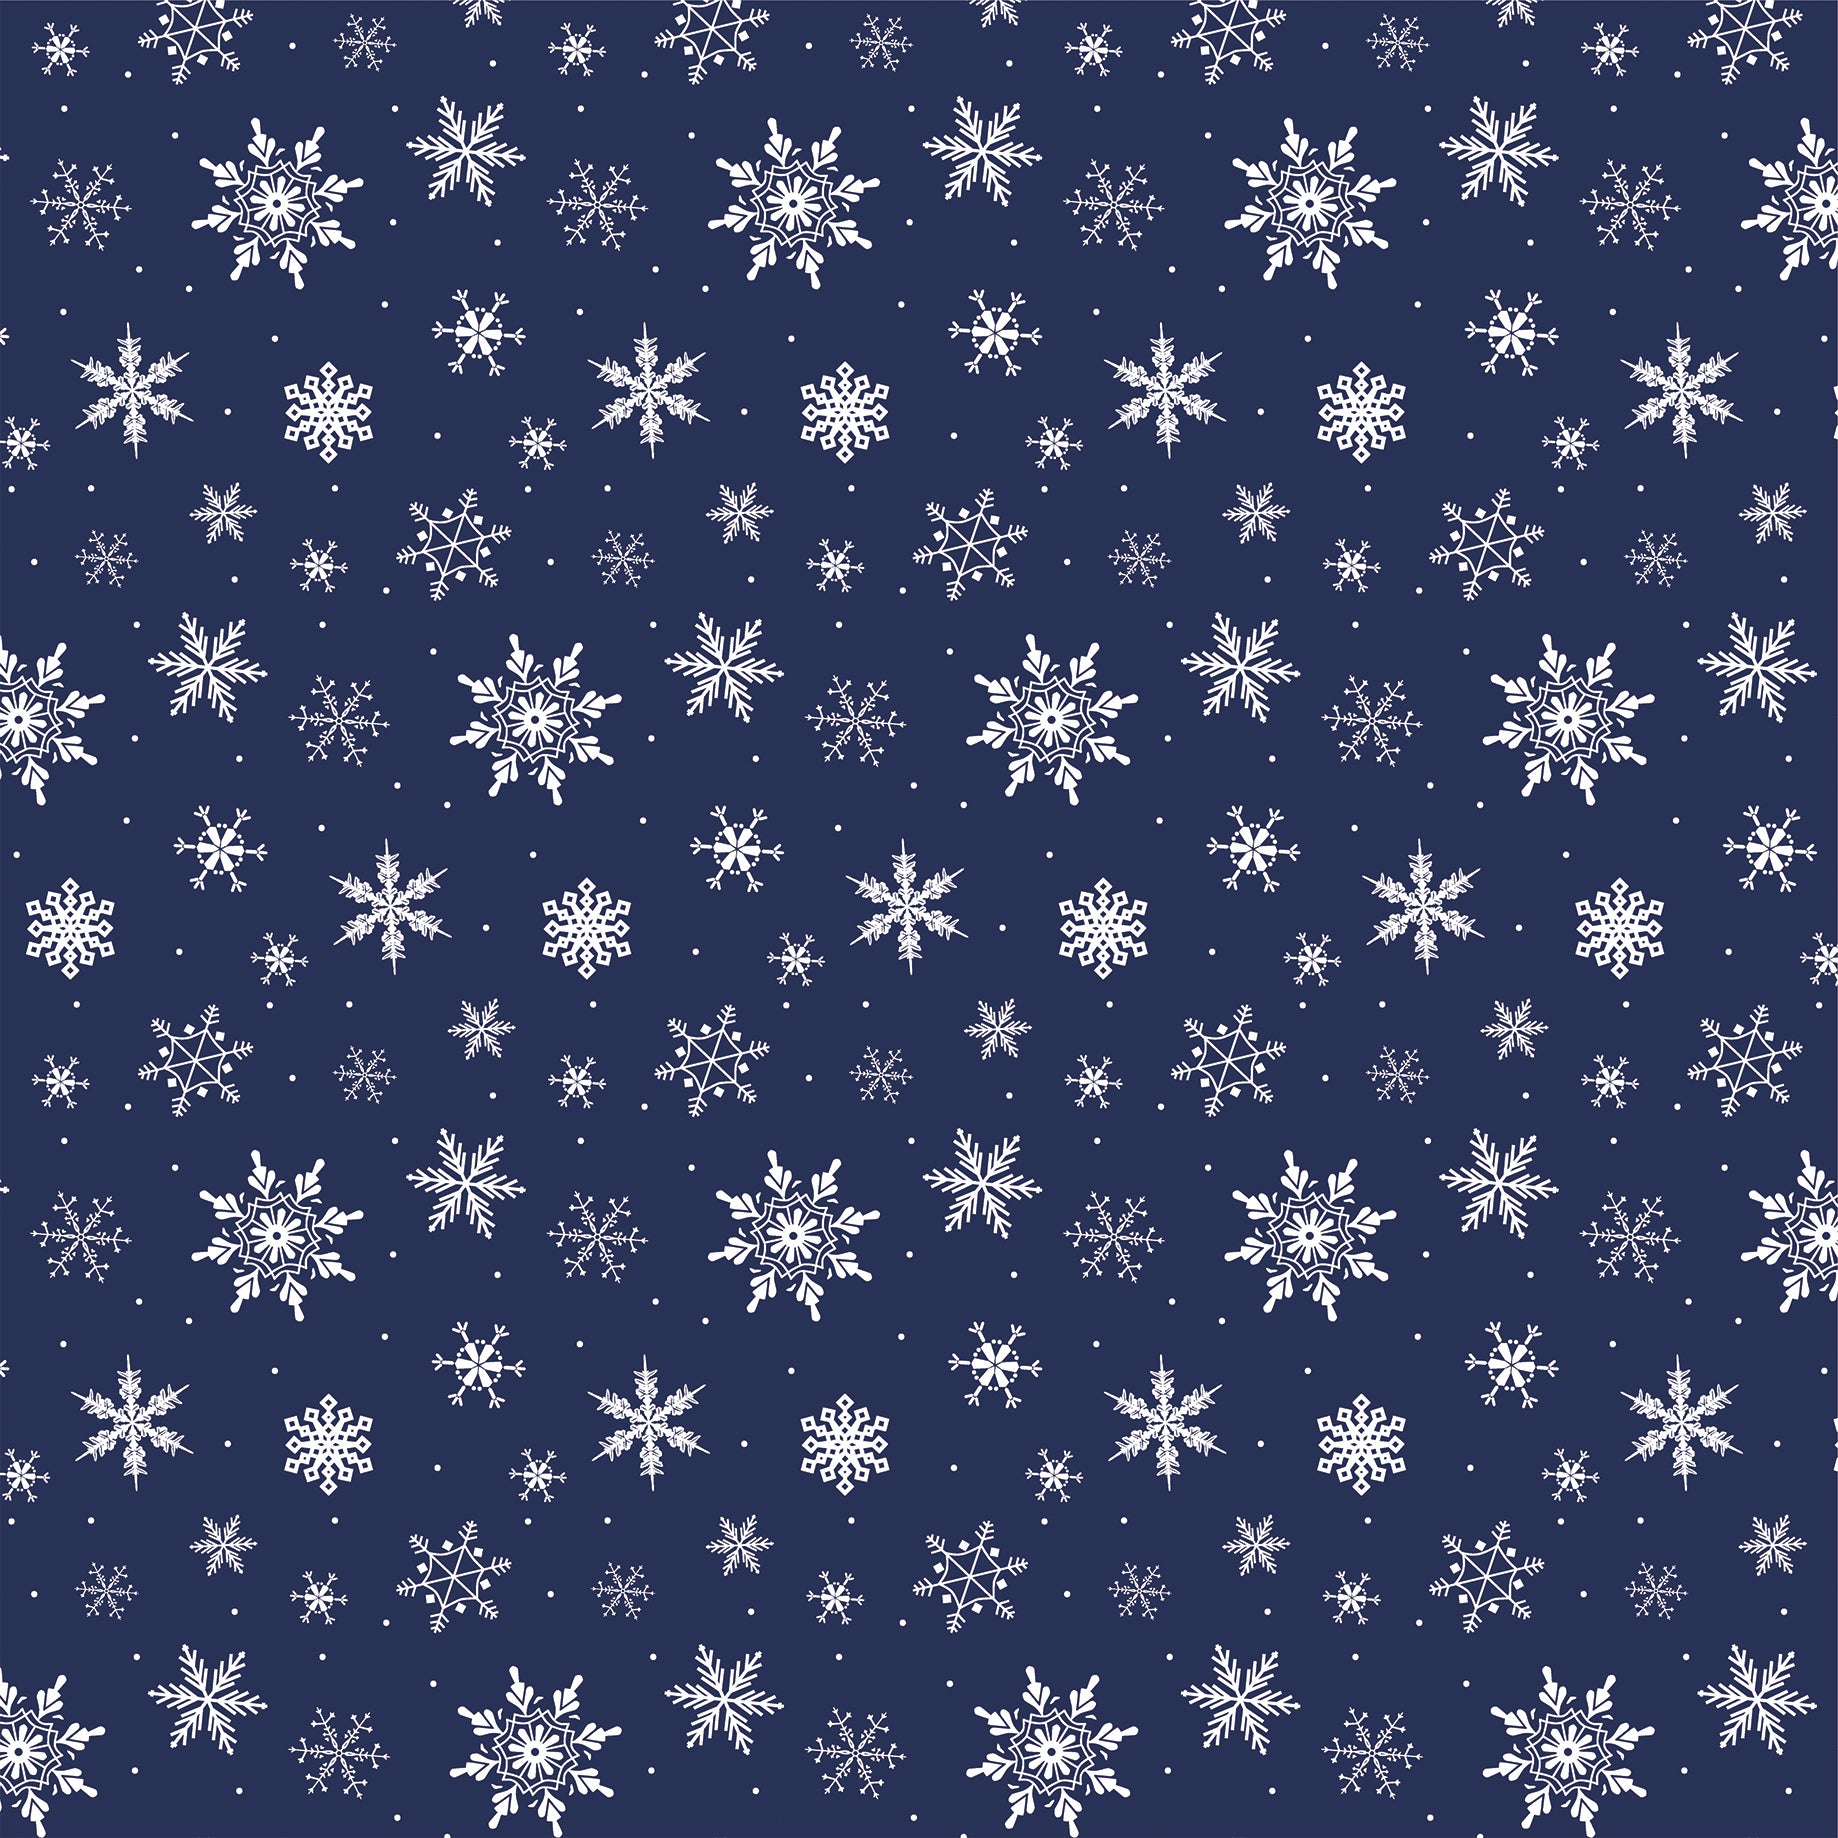 Wintertime Collection 4x4 Journaling Cards 12 x 12 Double-Sided Scrapbook Paper by Carta Bella